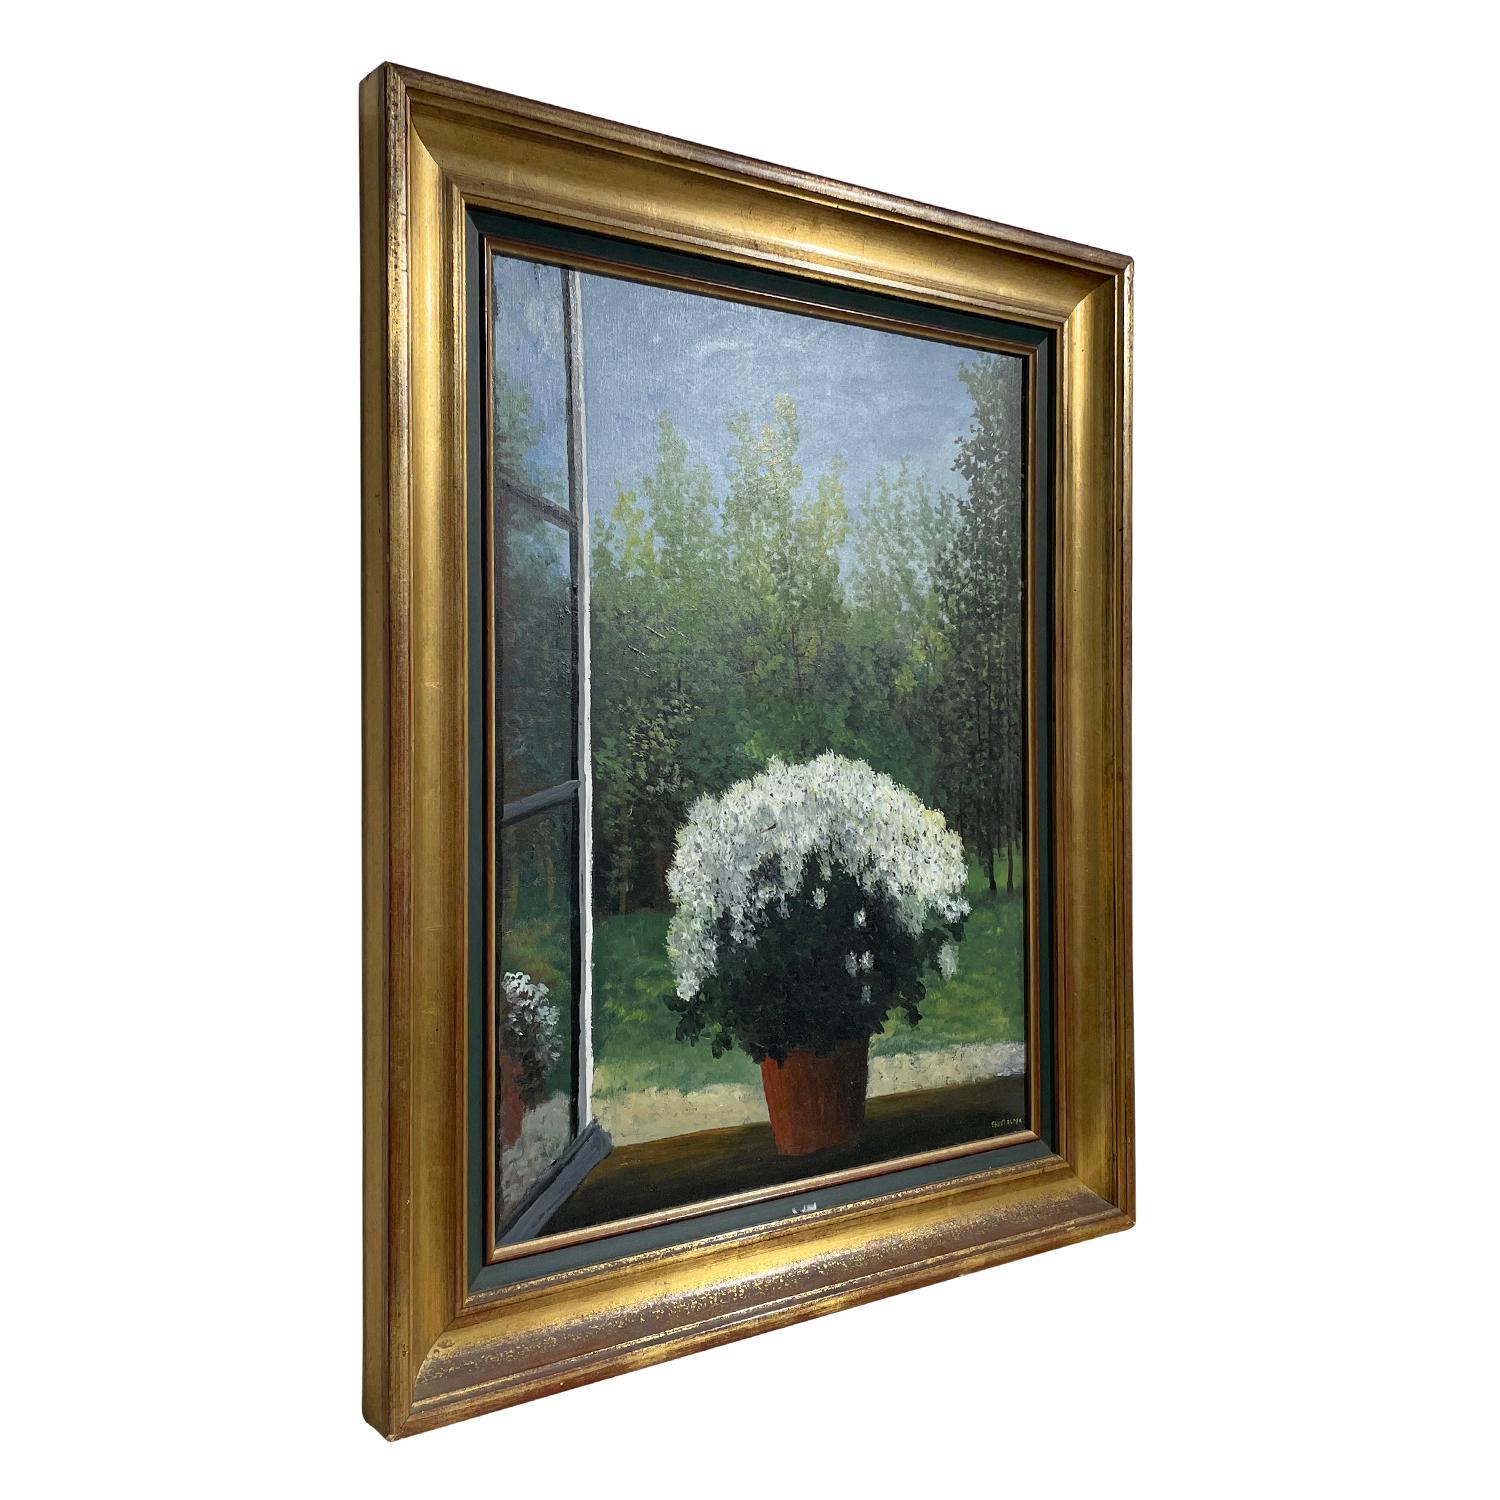 A white-green, vintage French still life oil on canvas painting by Michel De Saint-Alban in a hand crafted, original gilded wood frame, in good condition. The colorful painting depicts dandelions in a red flower pot on a wood railing on a sunny day